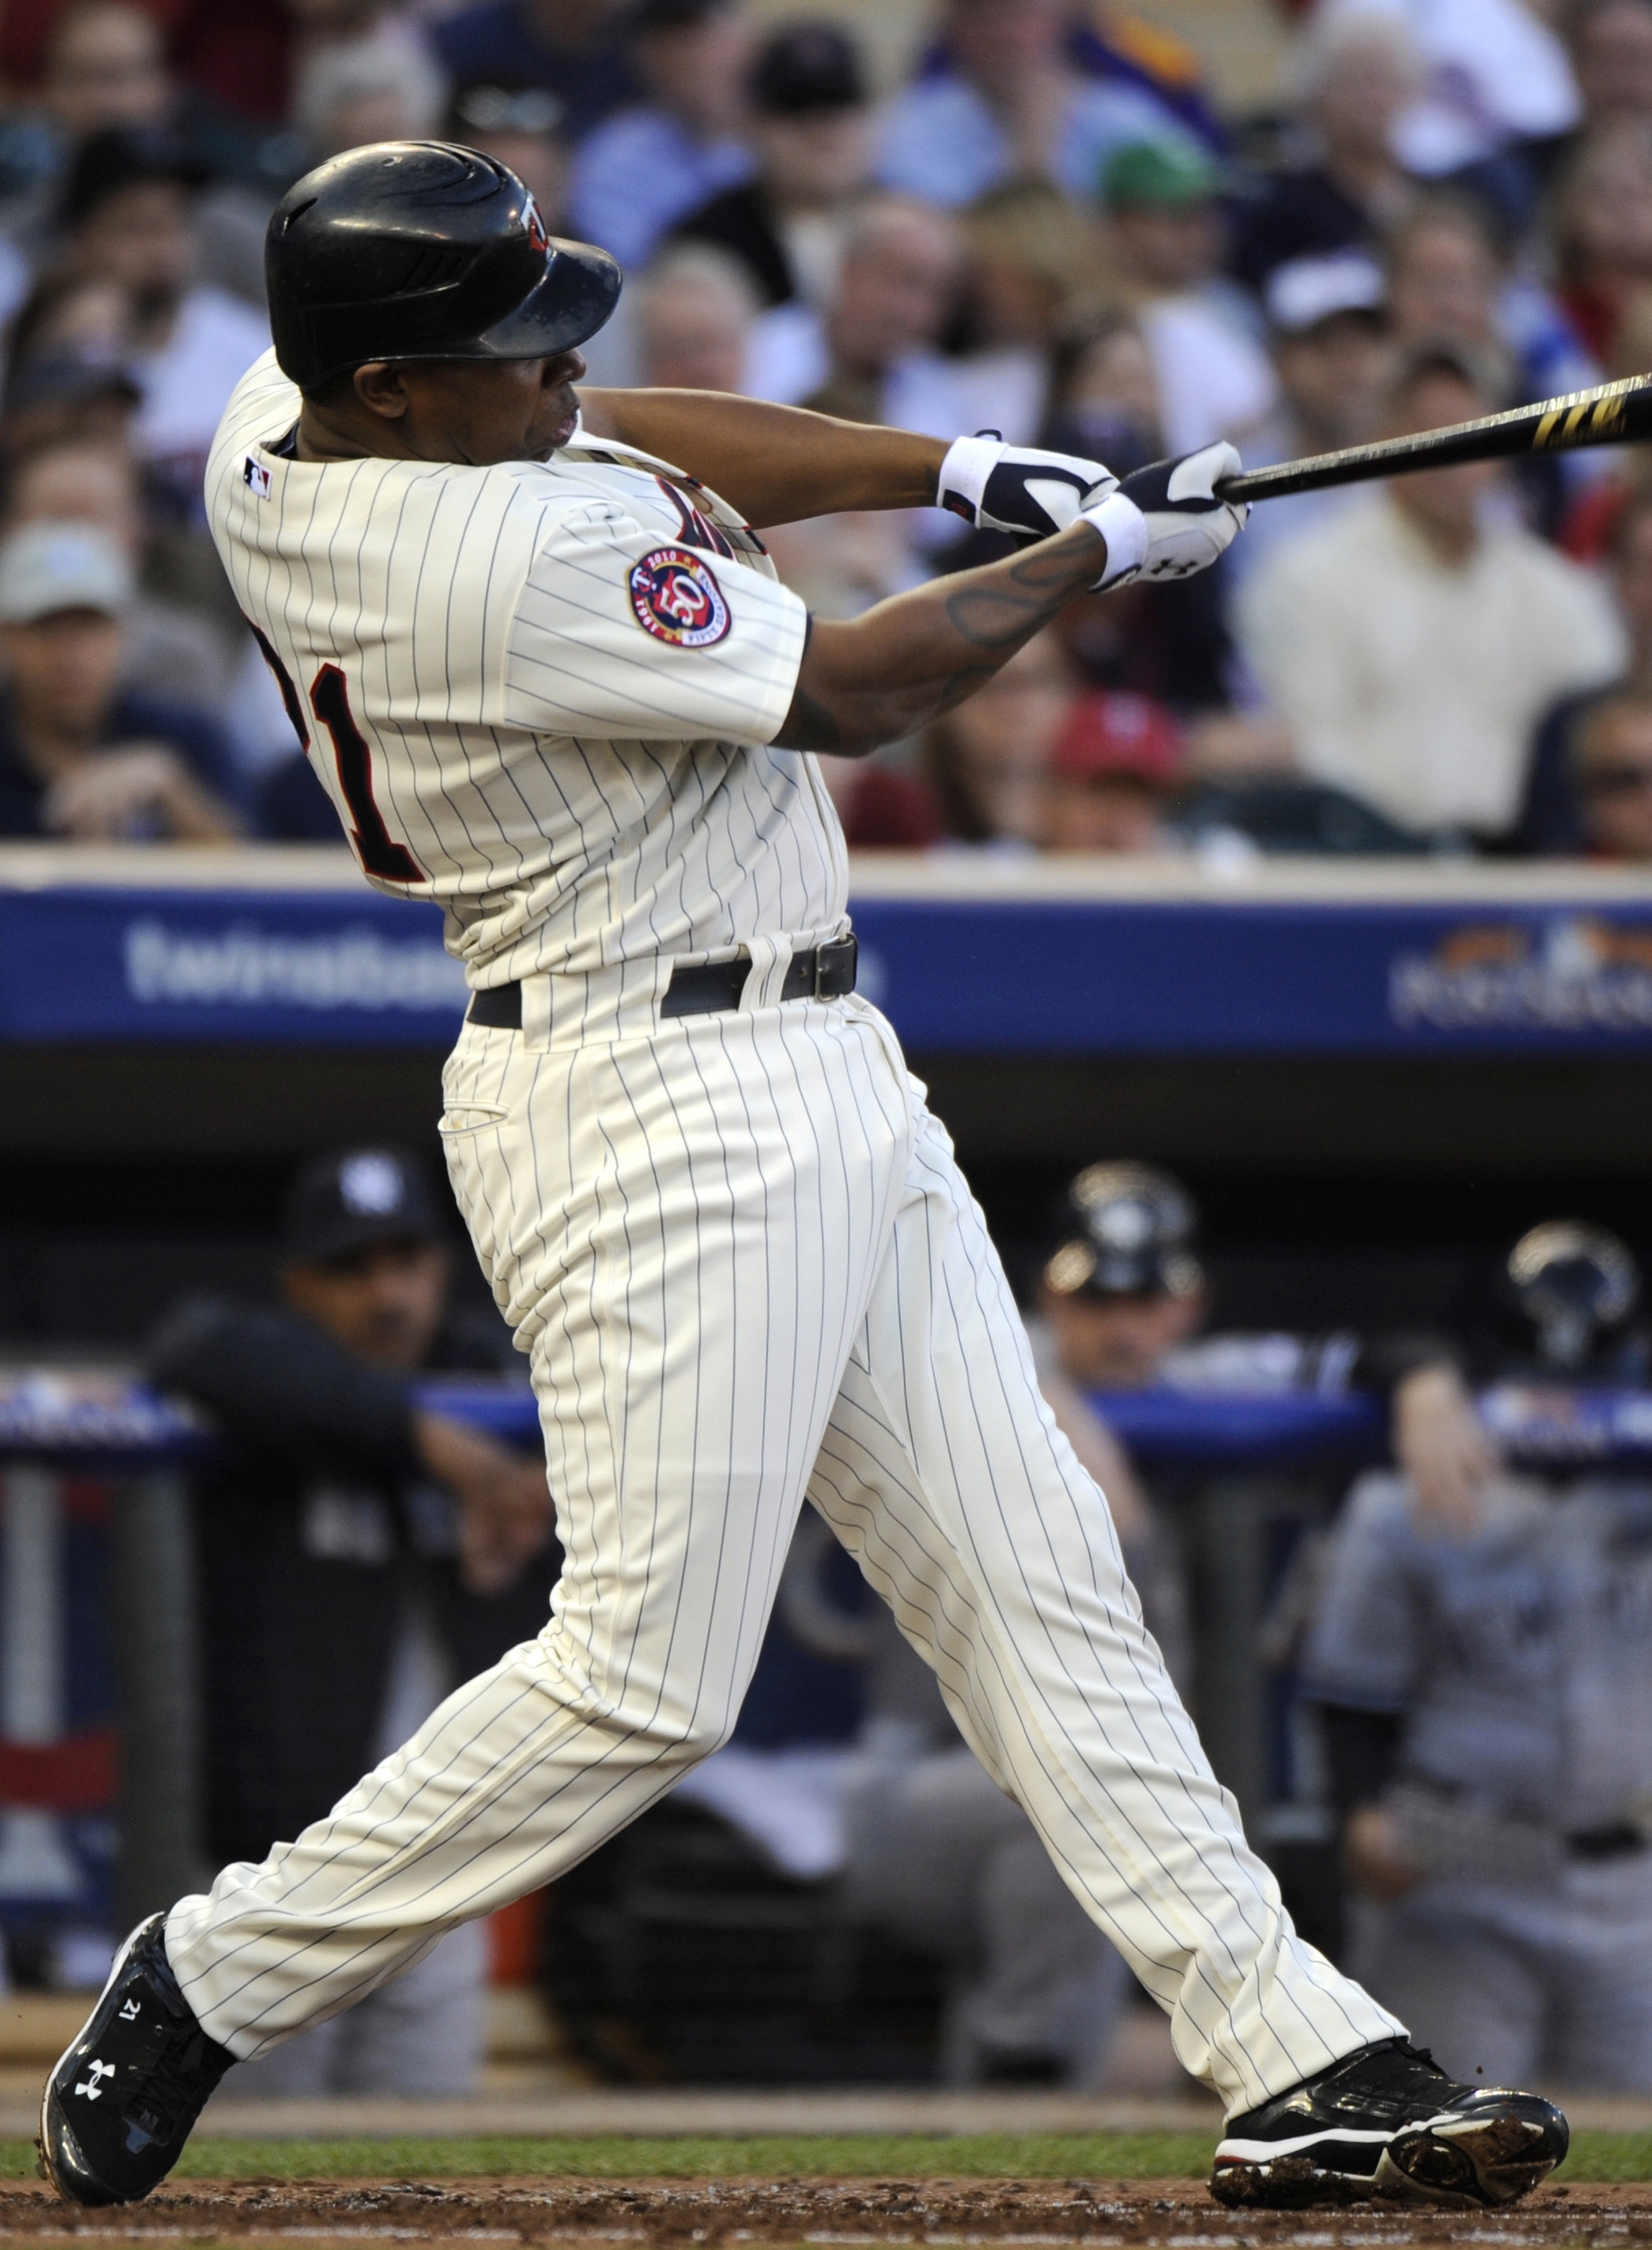 MINNEAPOLIS, MN - OCTOBER 7: Delmon Young #21 of the Minnesota Twins singles during game two of the ALDS game against the New York Yankees on October 7, 2010 at Target Field in Minneapolis, Minnesota.  (Photo by Hannah Foslien/Getty Images)